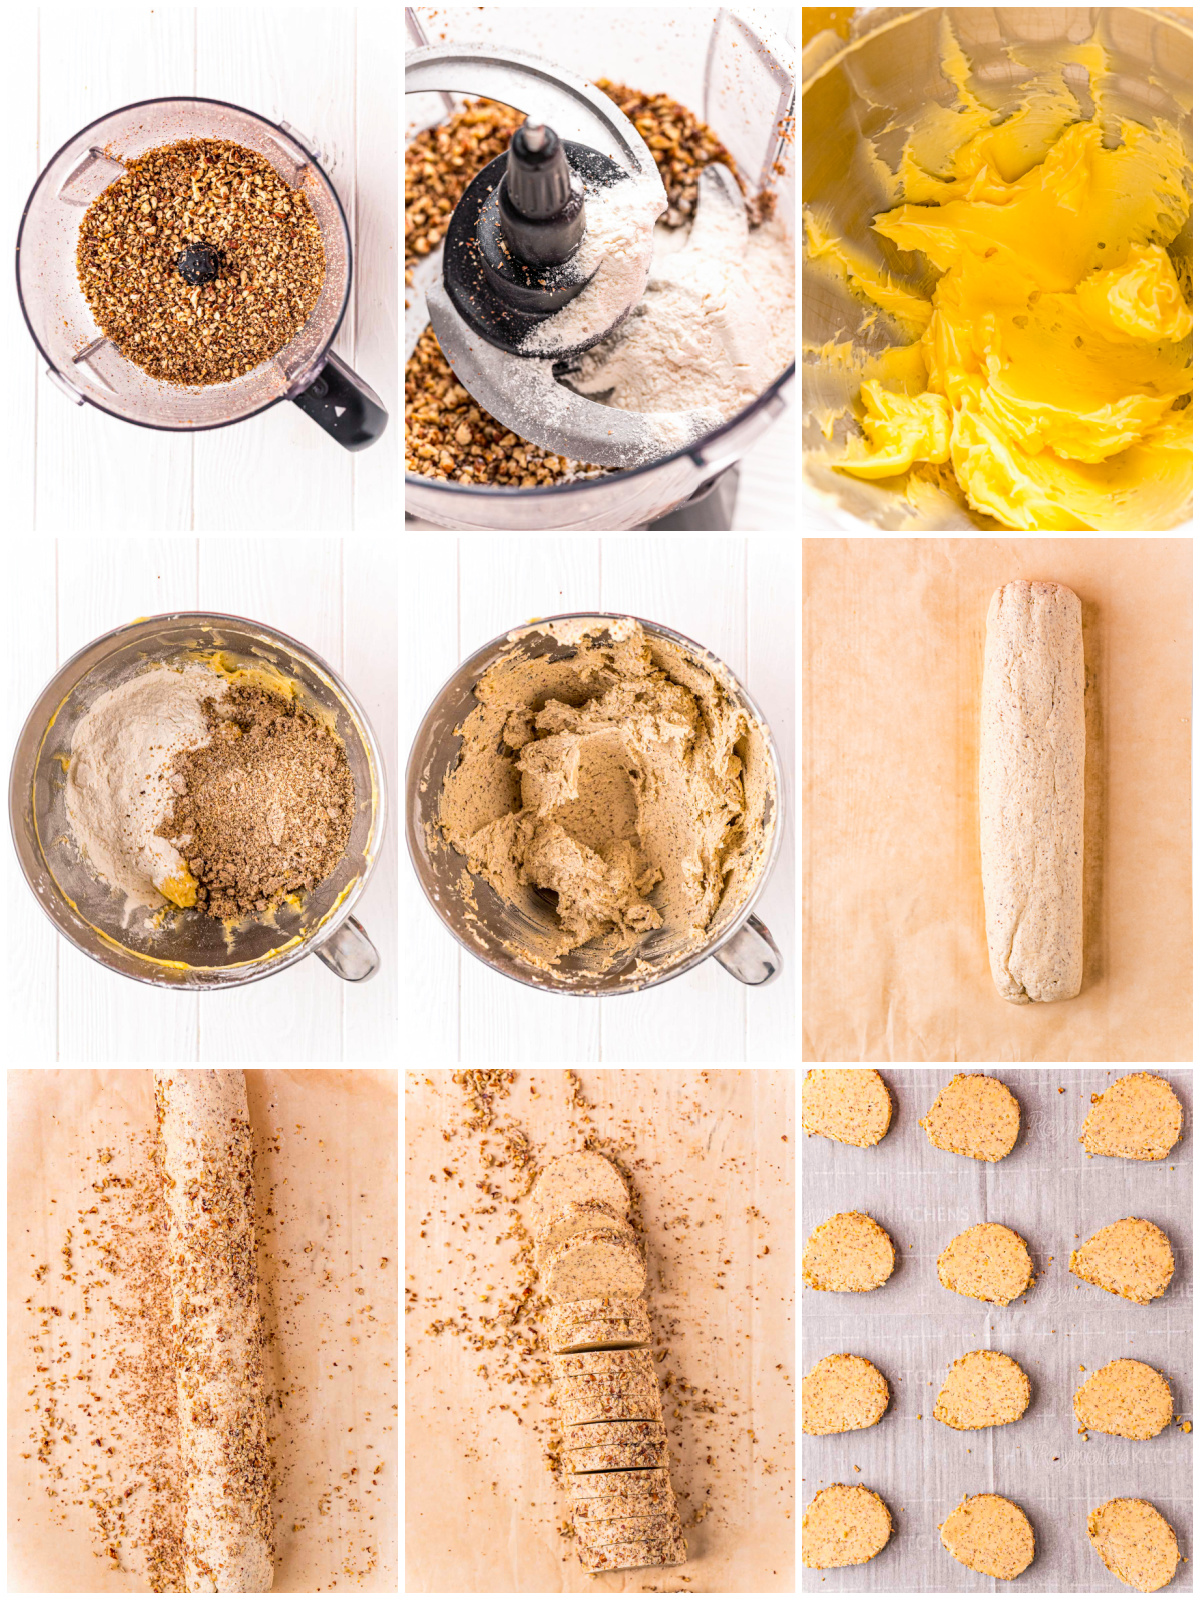 Step by step photos on how to make Pecan Sandies.